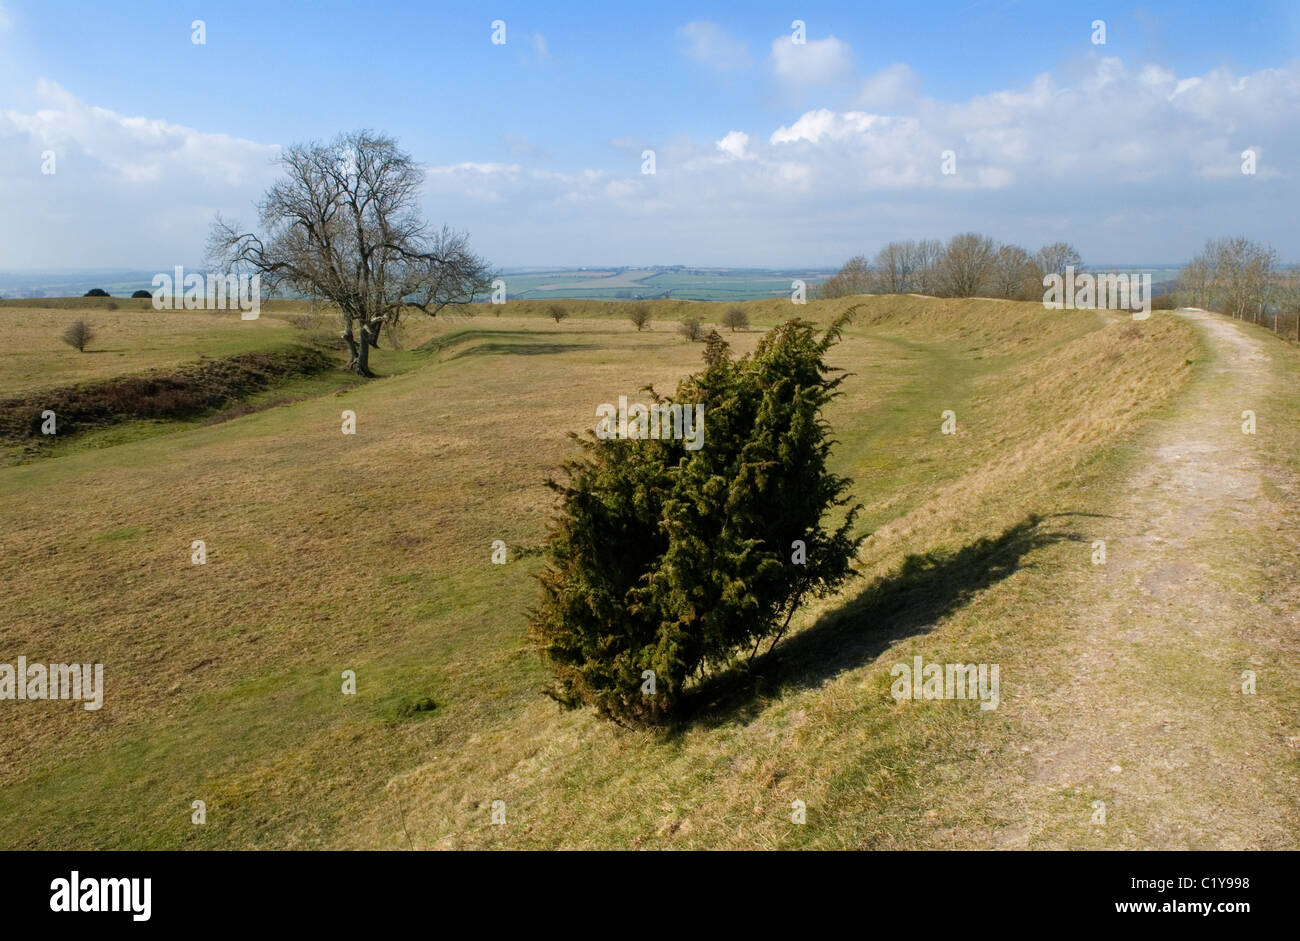 Figsbury Ring, Firsdown, Wiltshire UK. An Iron Age Hill Fort or a Neolithic Henge monument. Stock Photo